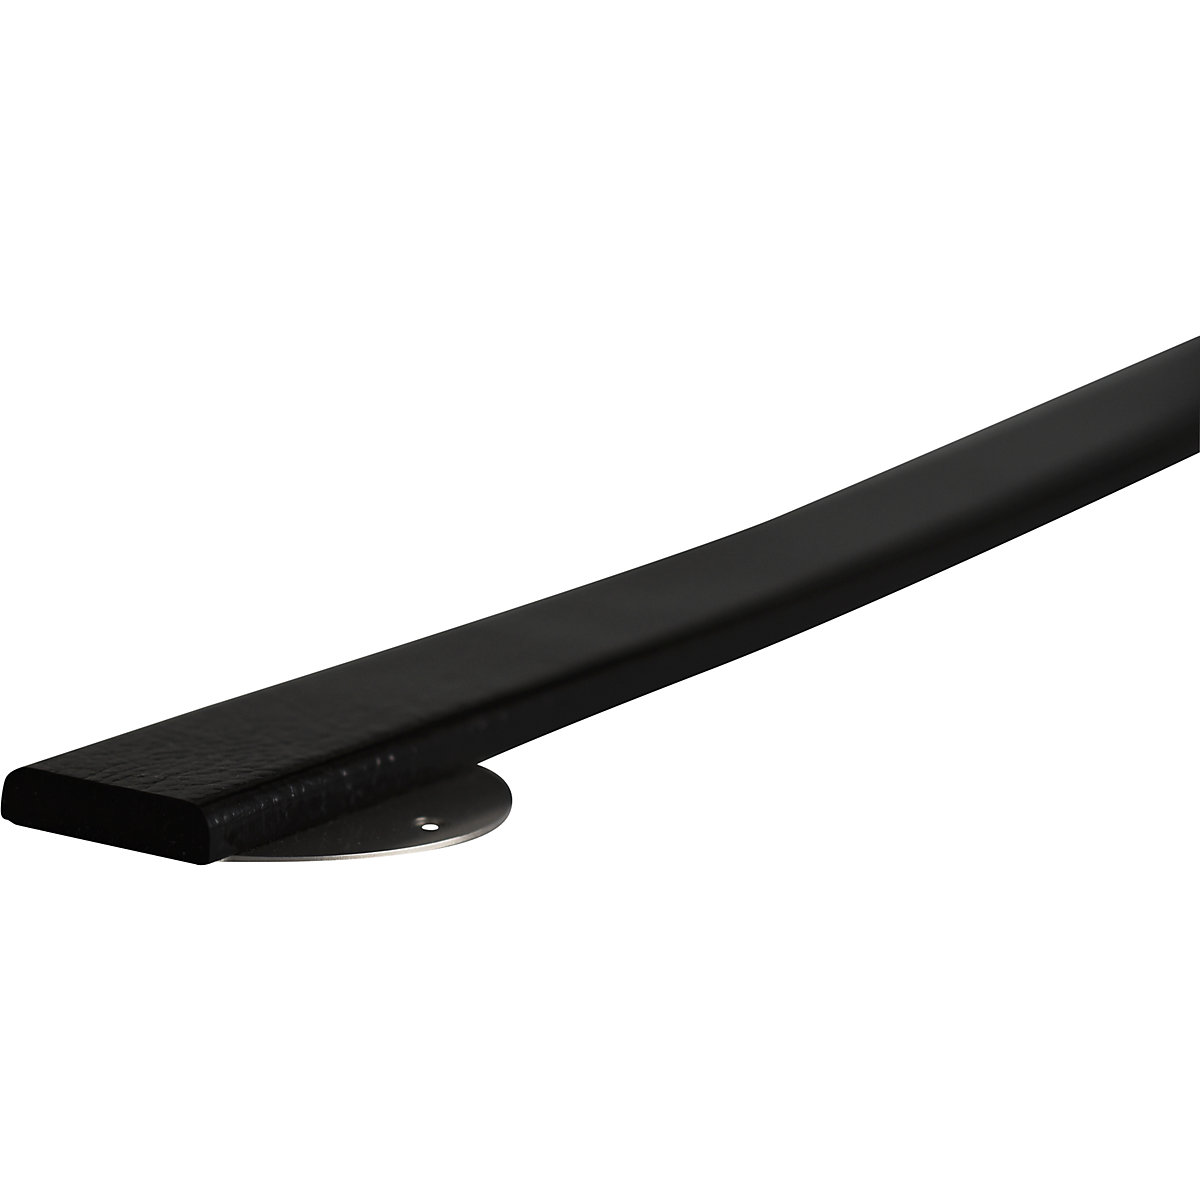 Knuffi® surface protection with mounting rail – SHG